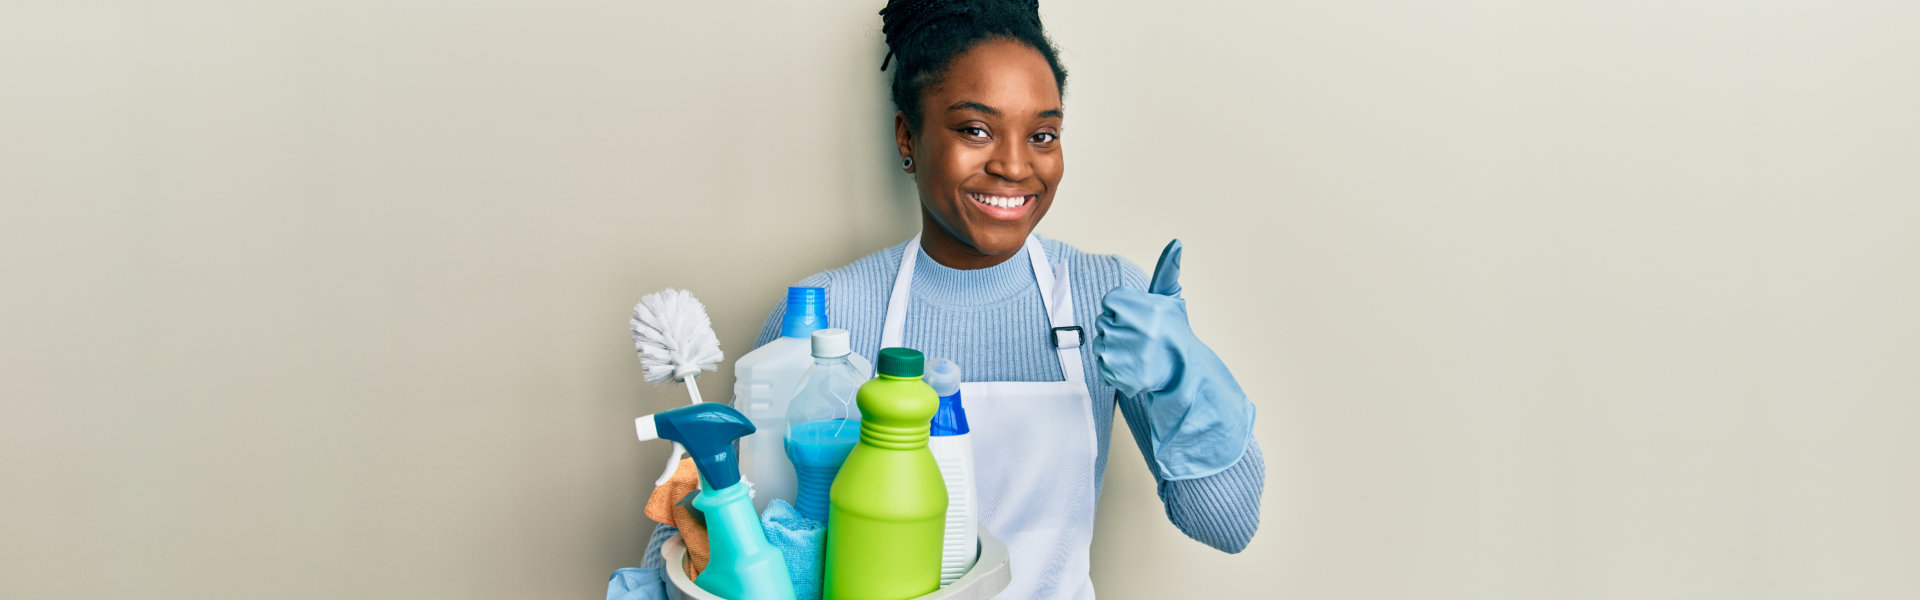 woman with braided hair wearing apron holding cleaning products